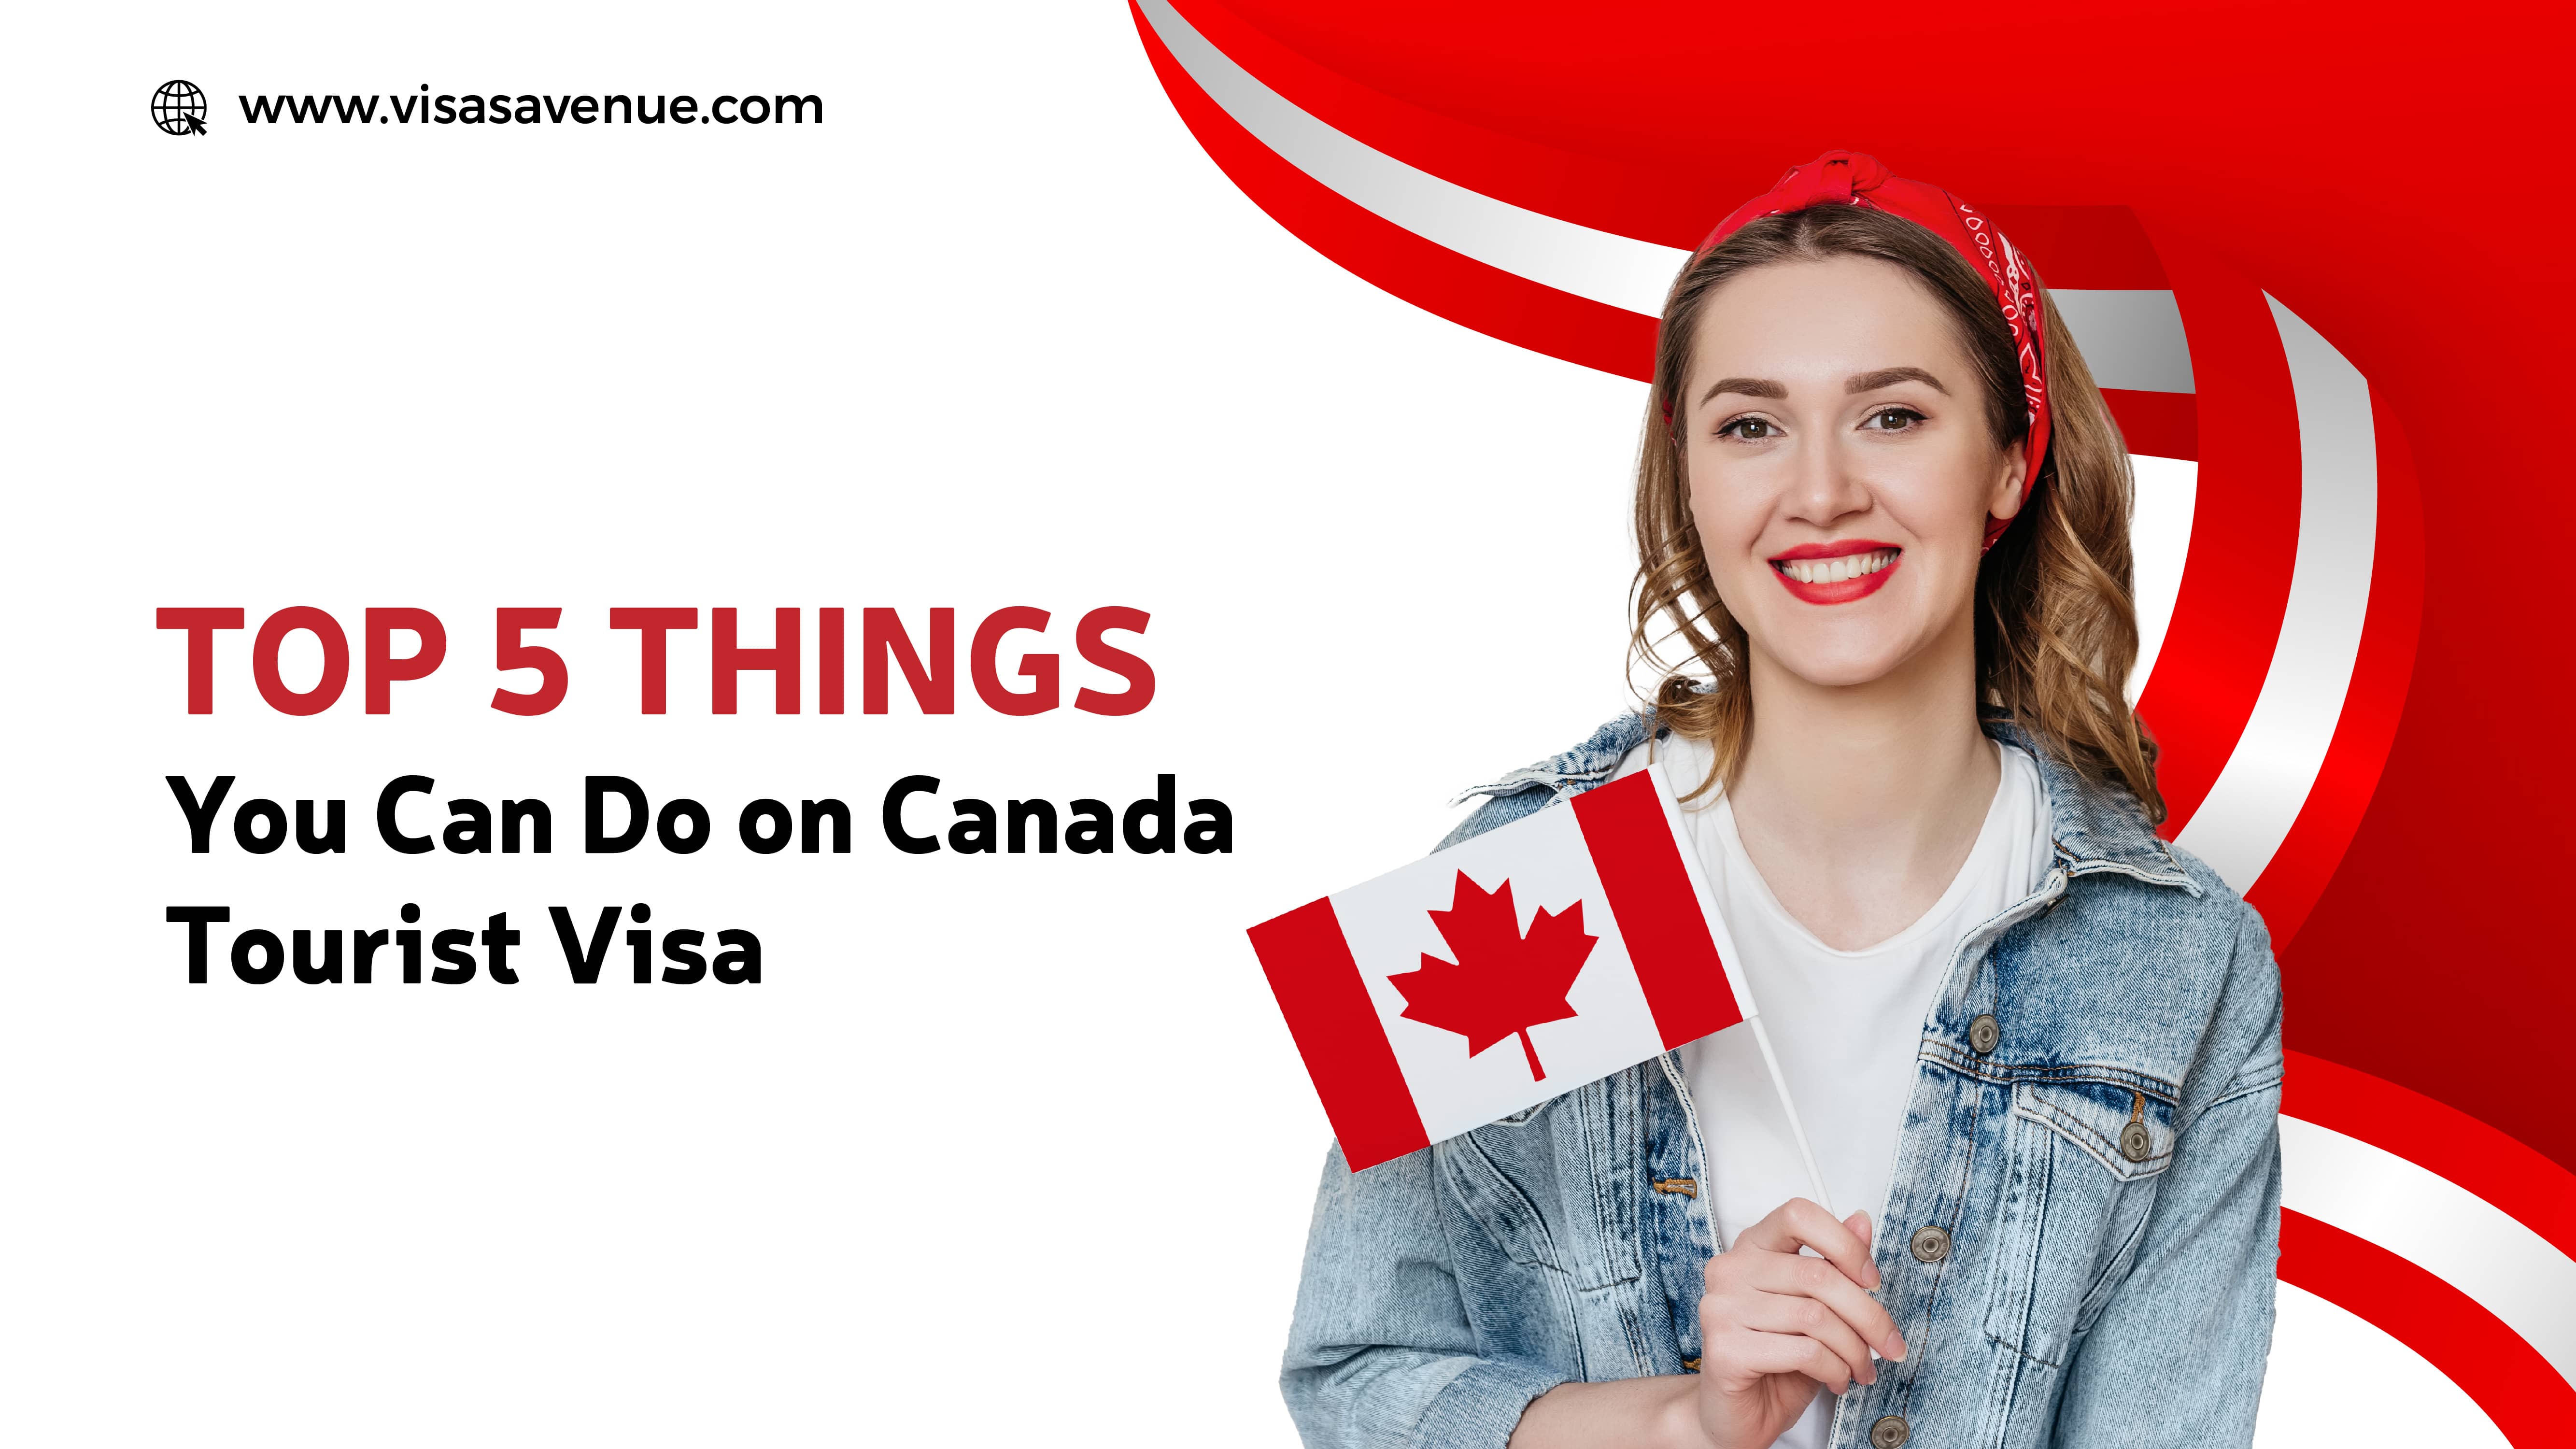 Top 5 Things You Can Do on Canada Tourist Visa